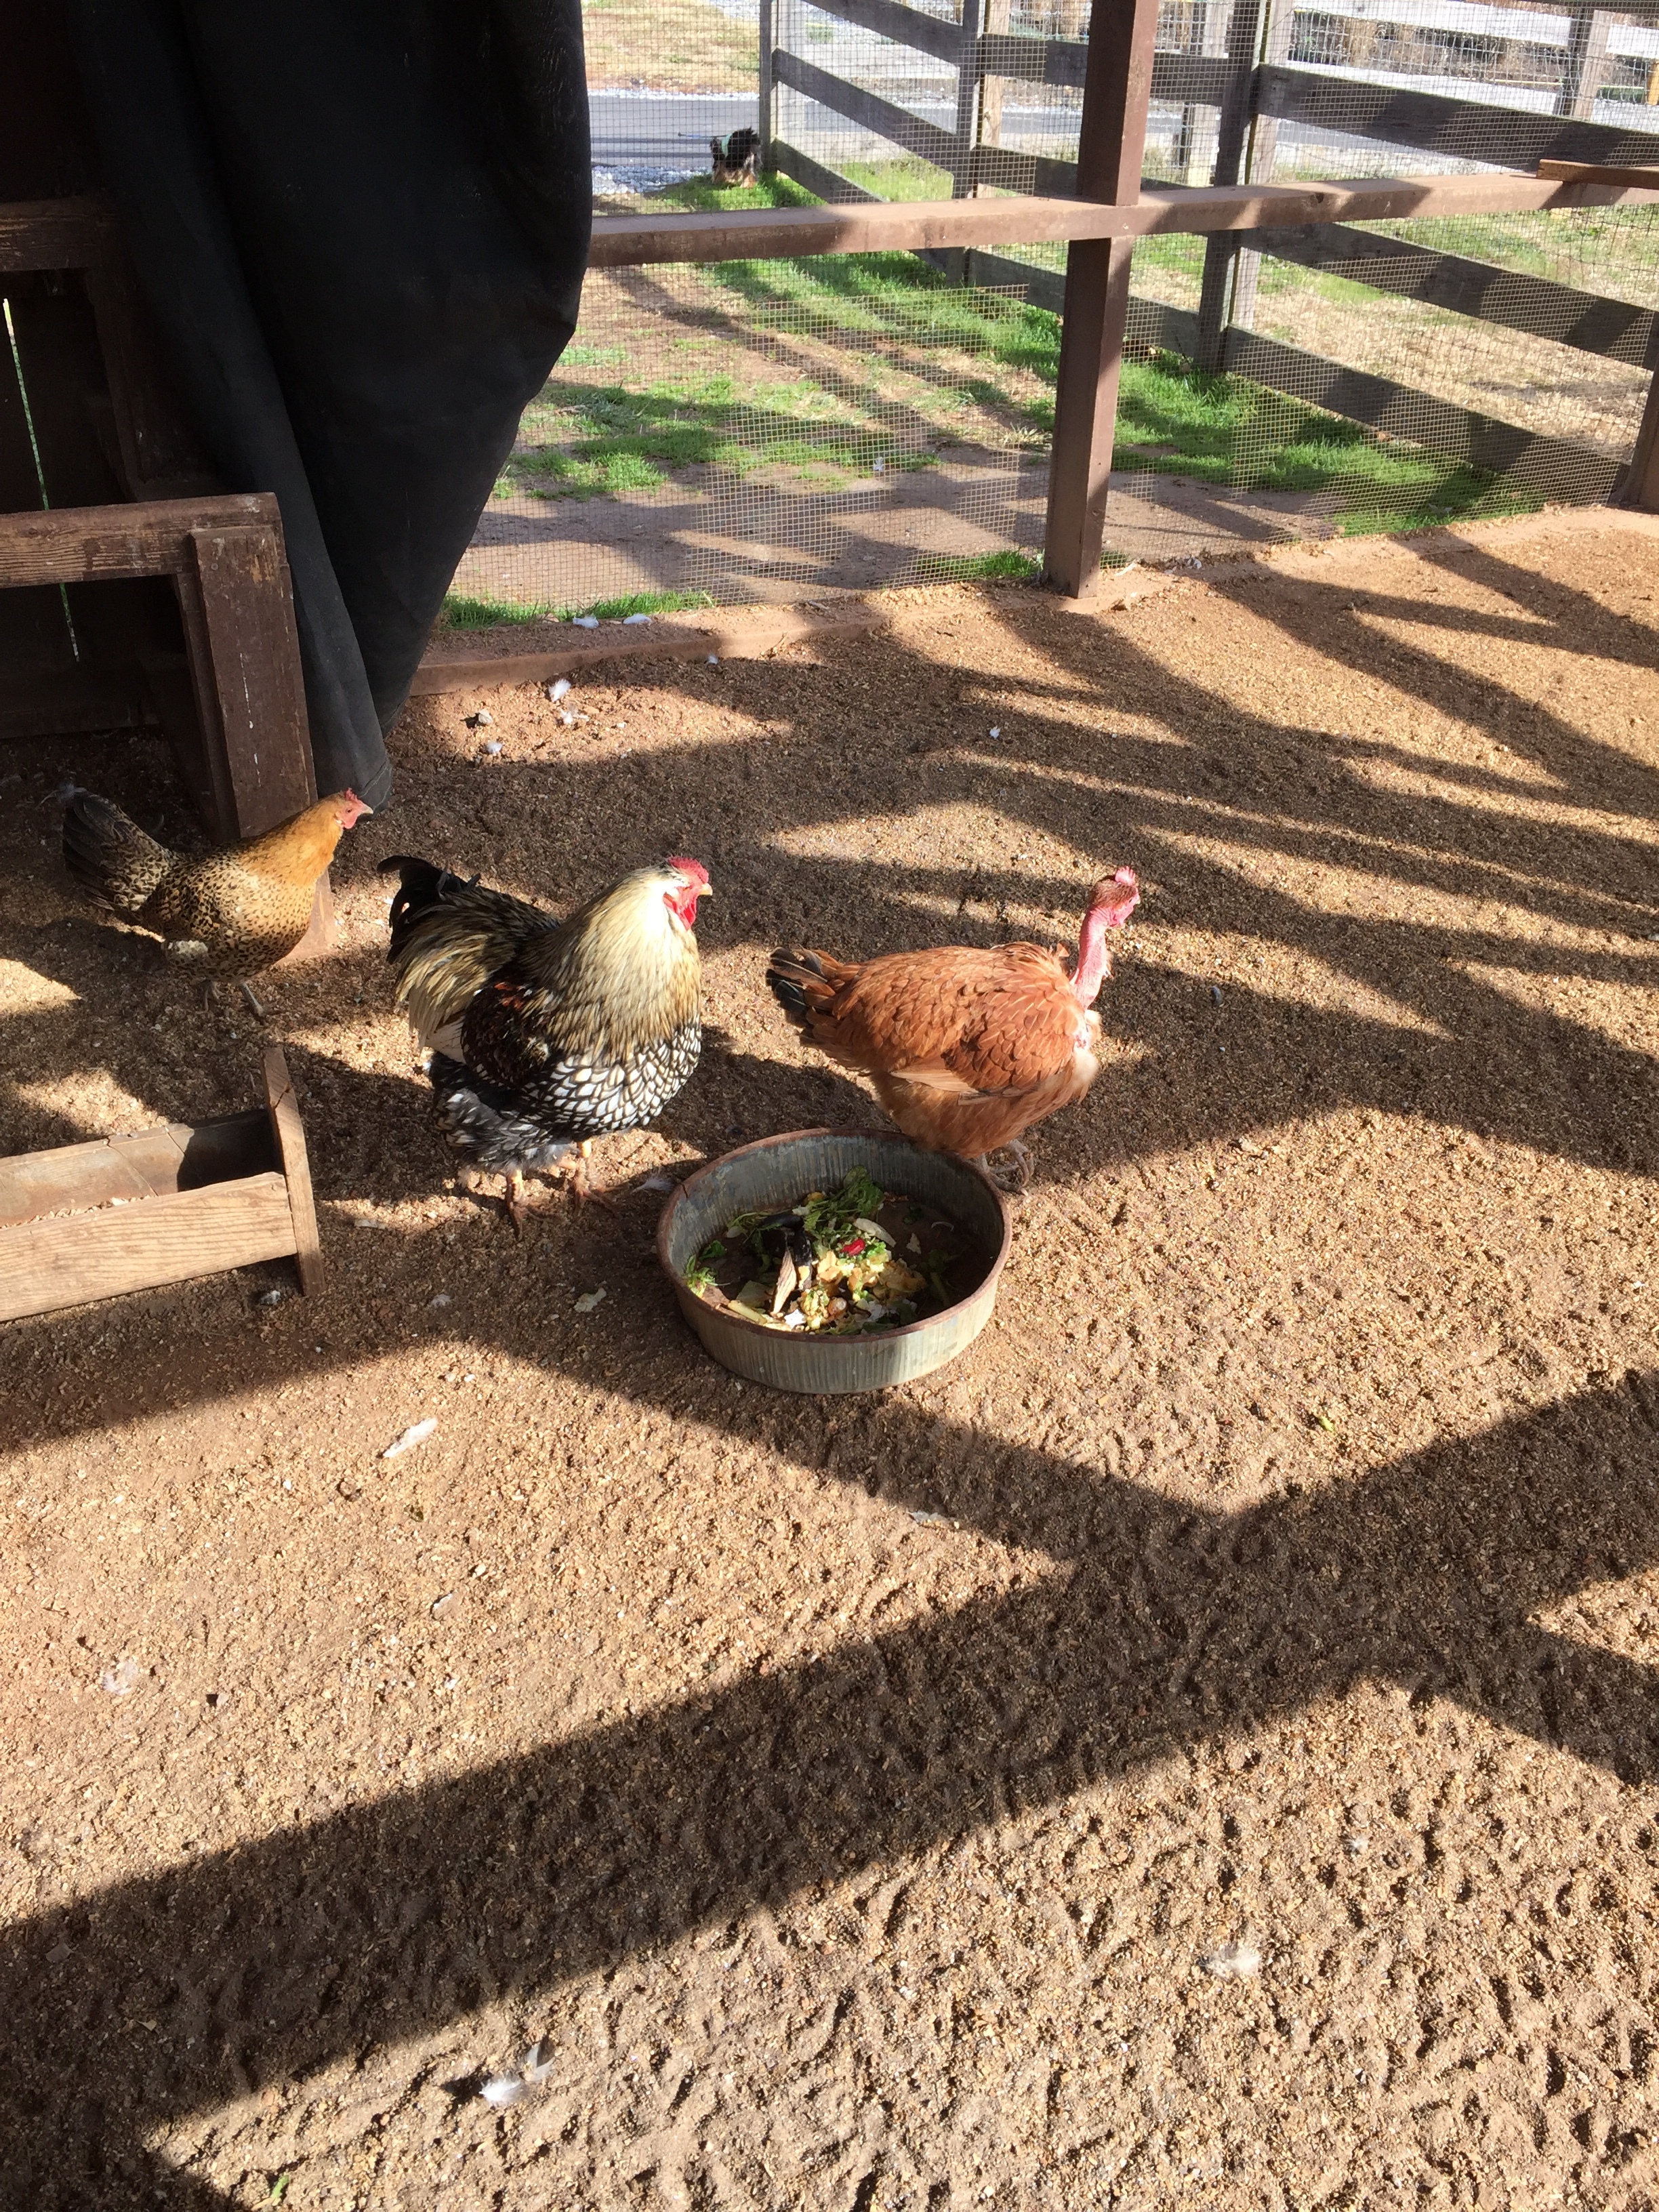 Meet some chickens and other animals at the petting farm.